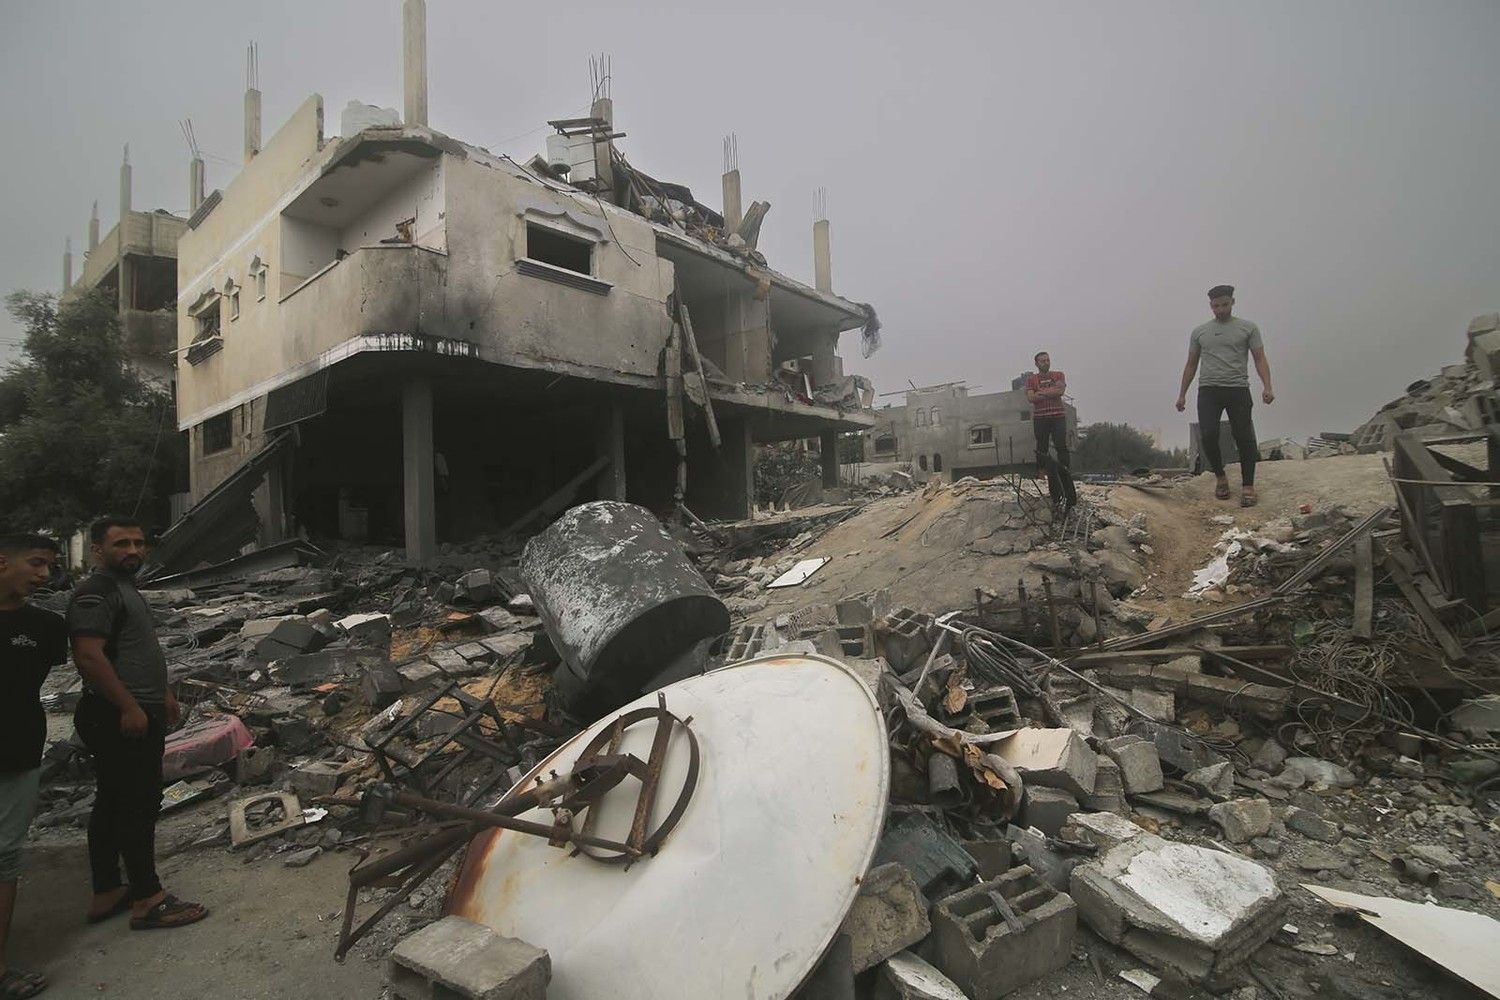 Monstrous explosions, ruins and grief: new footage of the war between Israel and Hamas